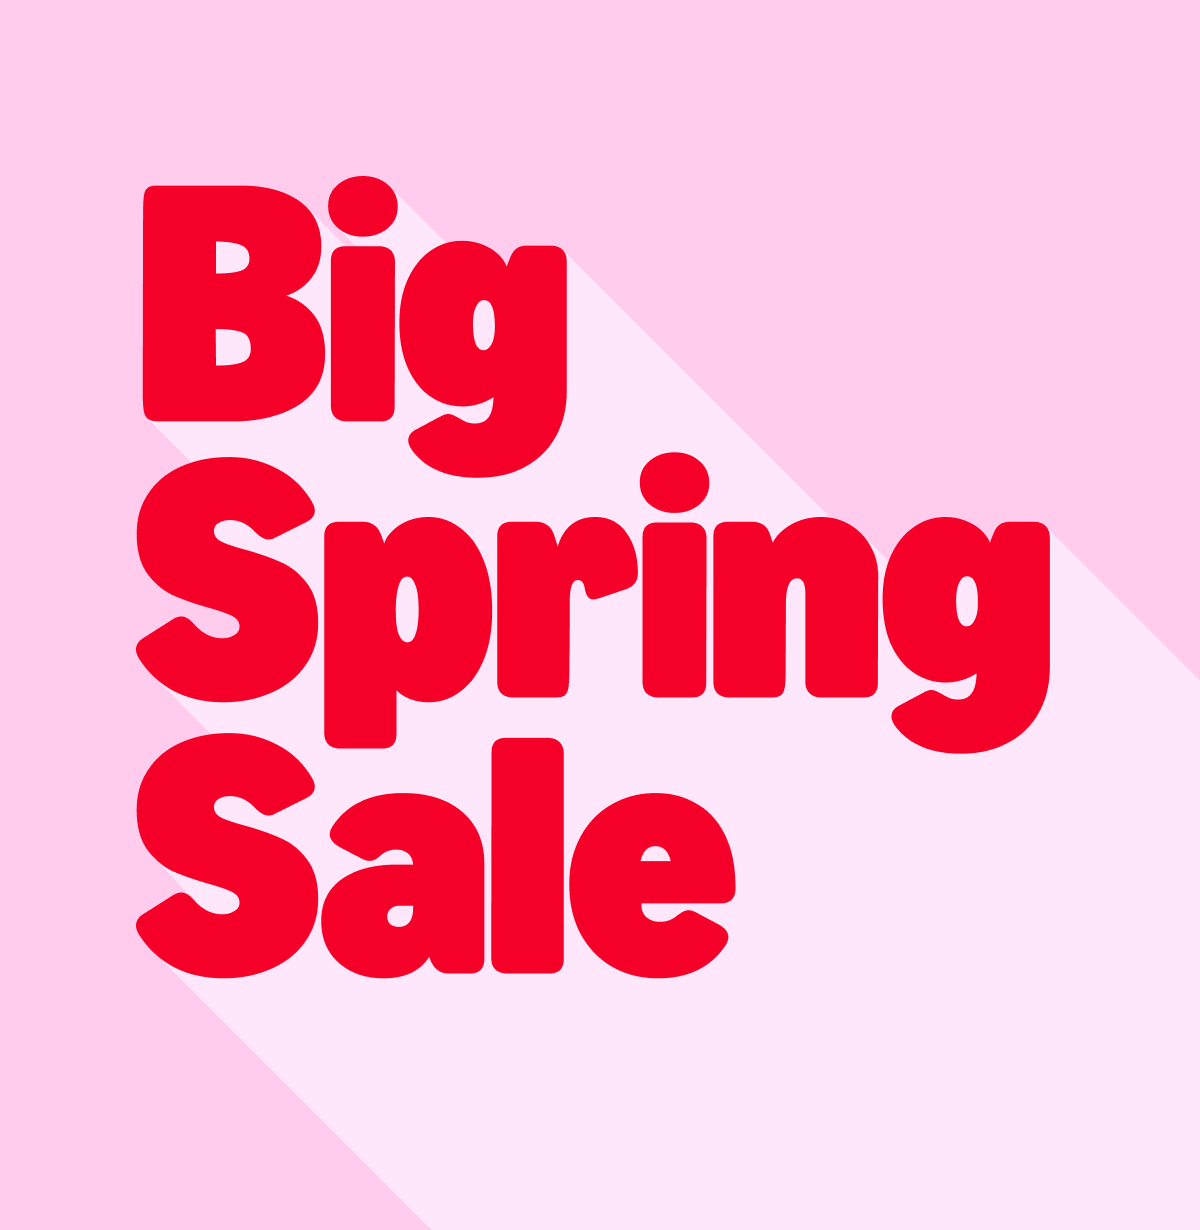 Promotional graphic for a "big spring sale" with text overlaid on a pink background.